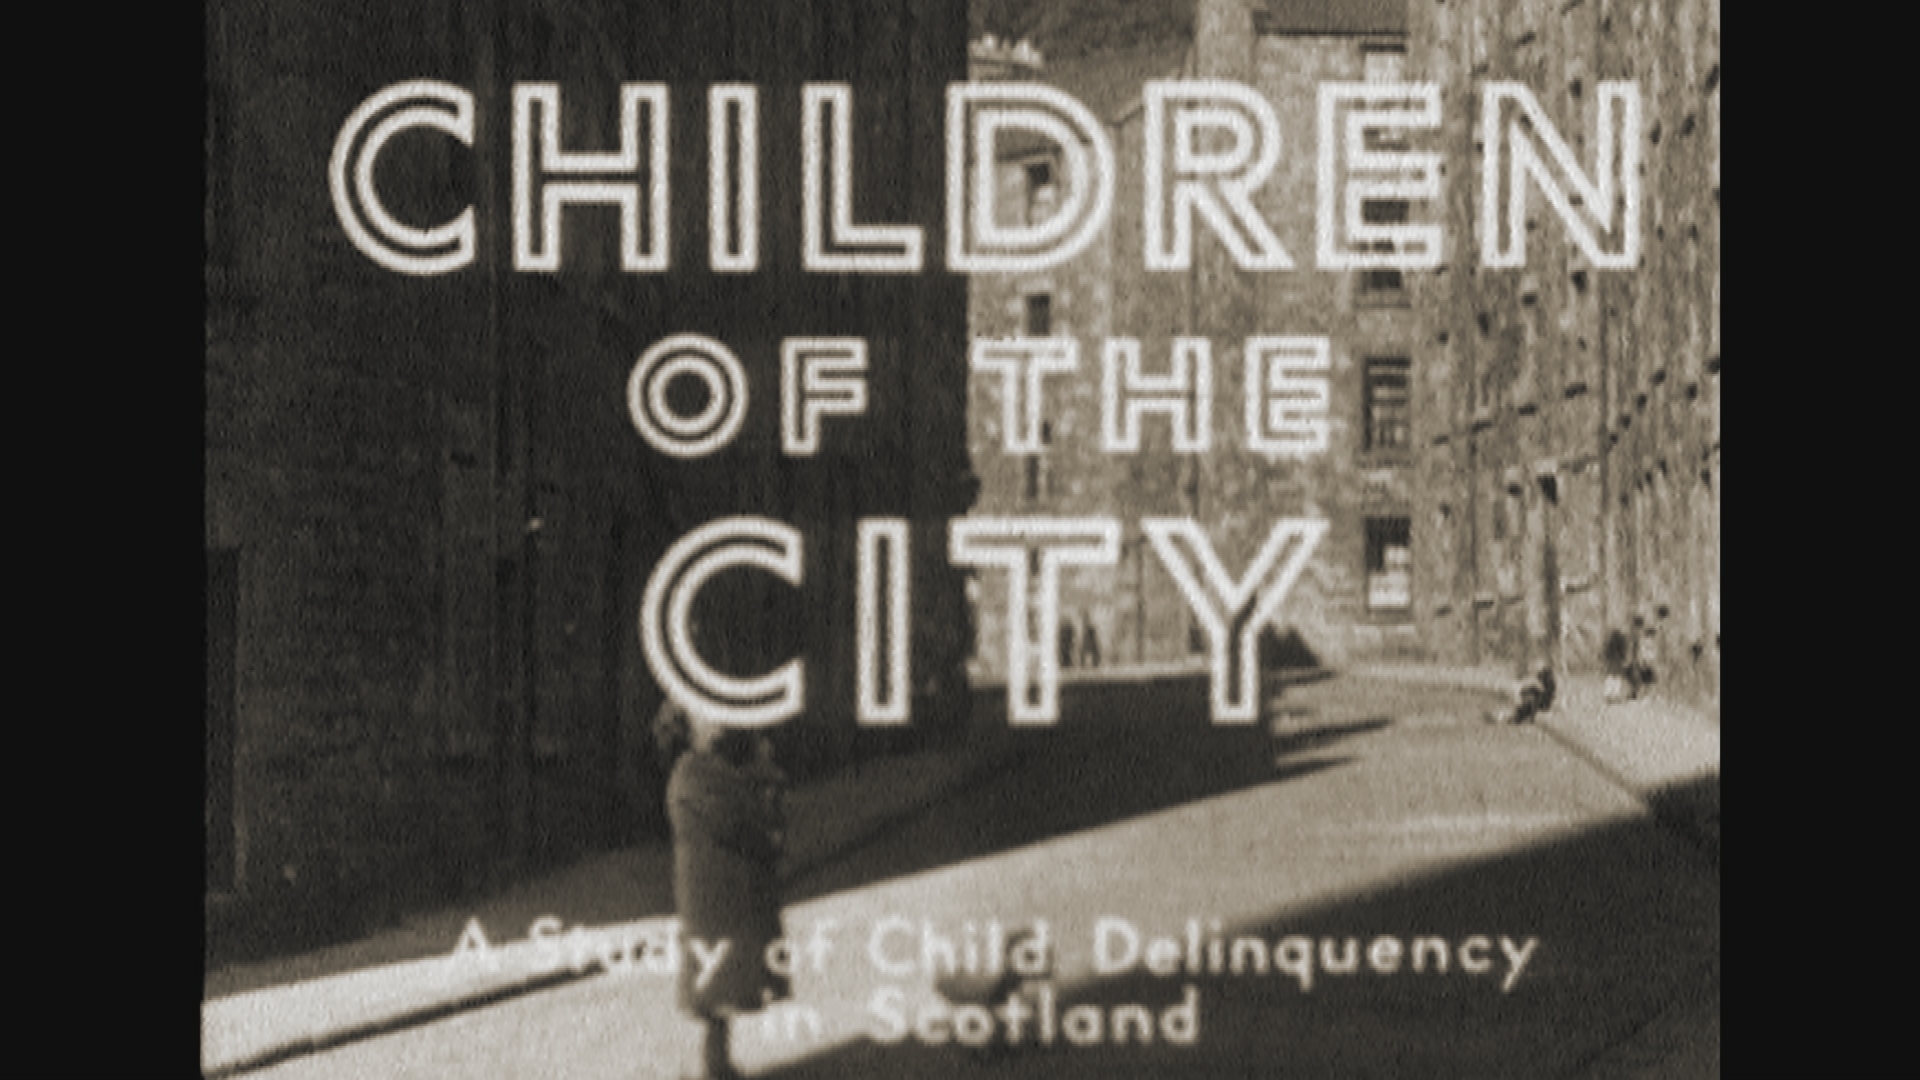 New documentary shines light on life in Dundee of yesteryear - The Courier